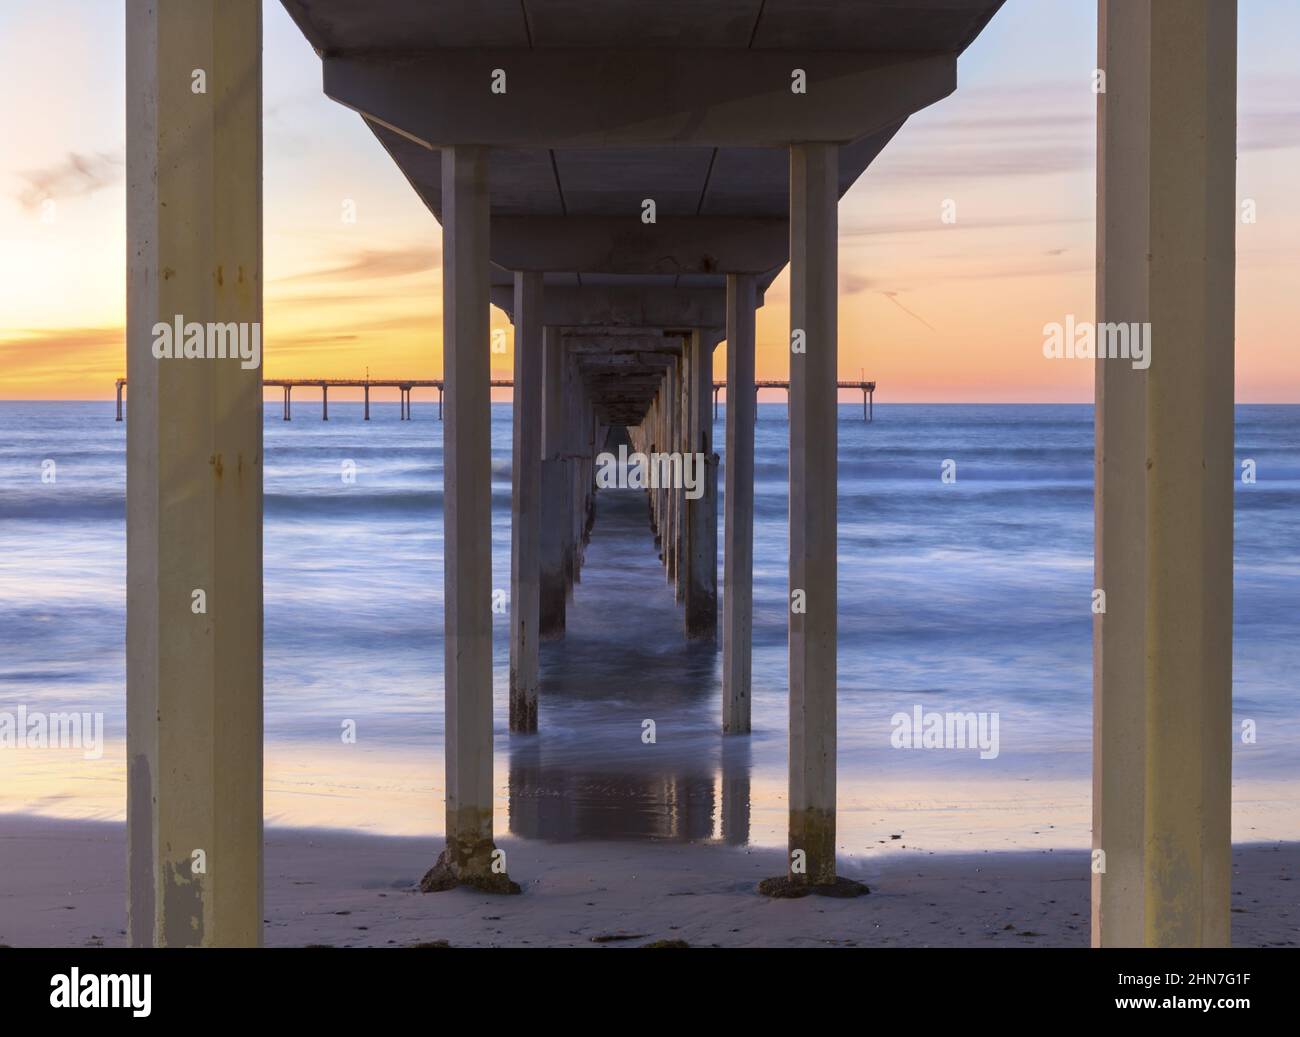 View Under Ocean Beach Pier Wooden Structure with Distant Orange Color Sunset Sky on Horizon in San Diego, Southern California Stock Photo